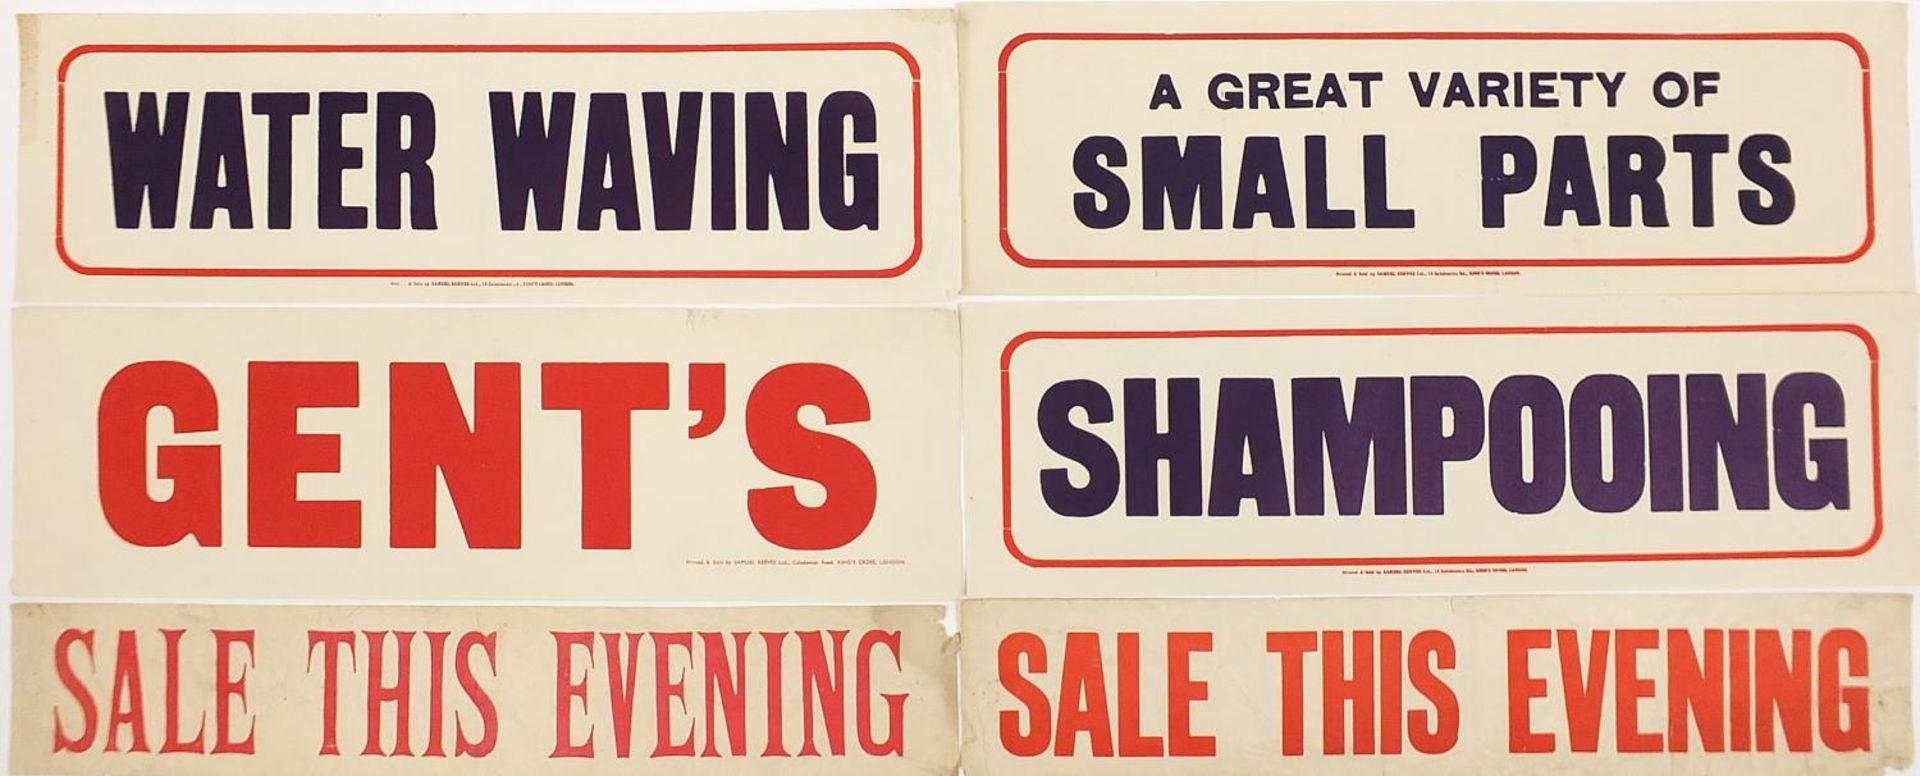 Four vintage lithographic shop advertising signs printed and sold by Samuel Reeves Ltd of Kings